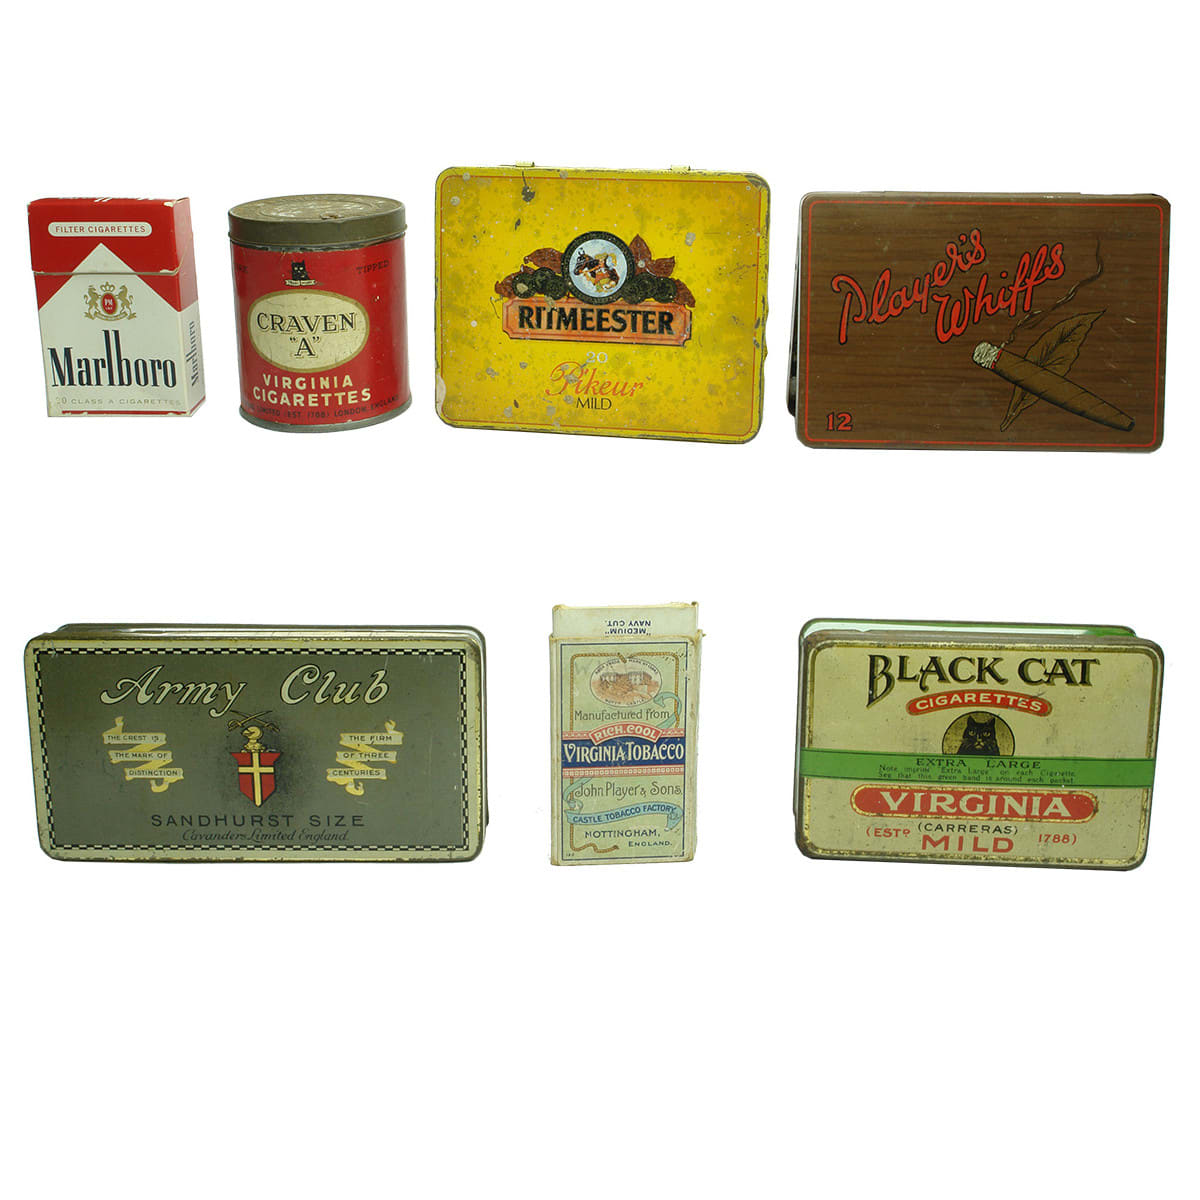 Seven Cigarette & Cigar tins and packets: Army Club; Players x 2 different; Black Cat; Craven A; Marlboro.